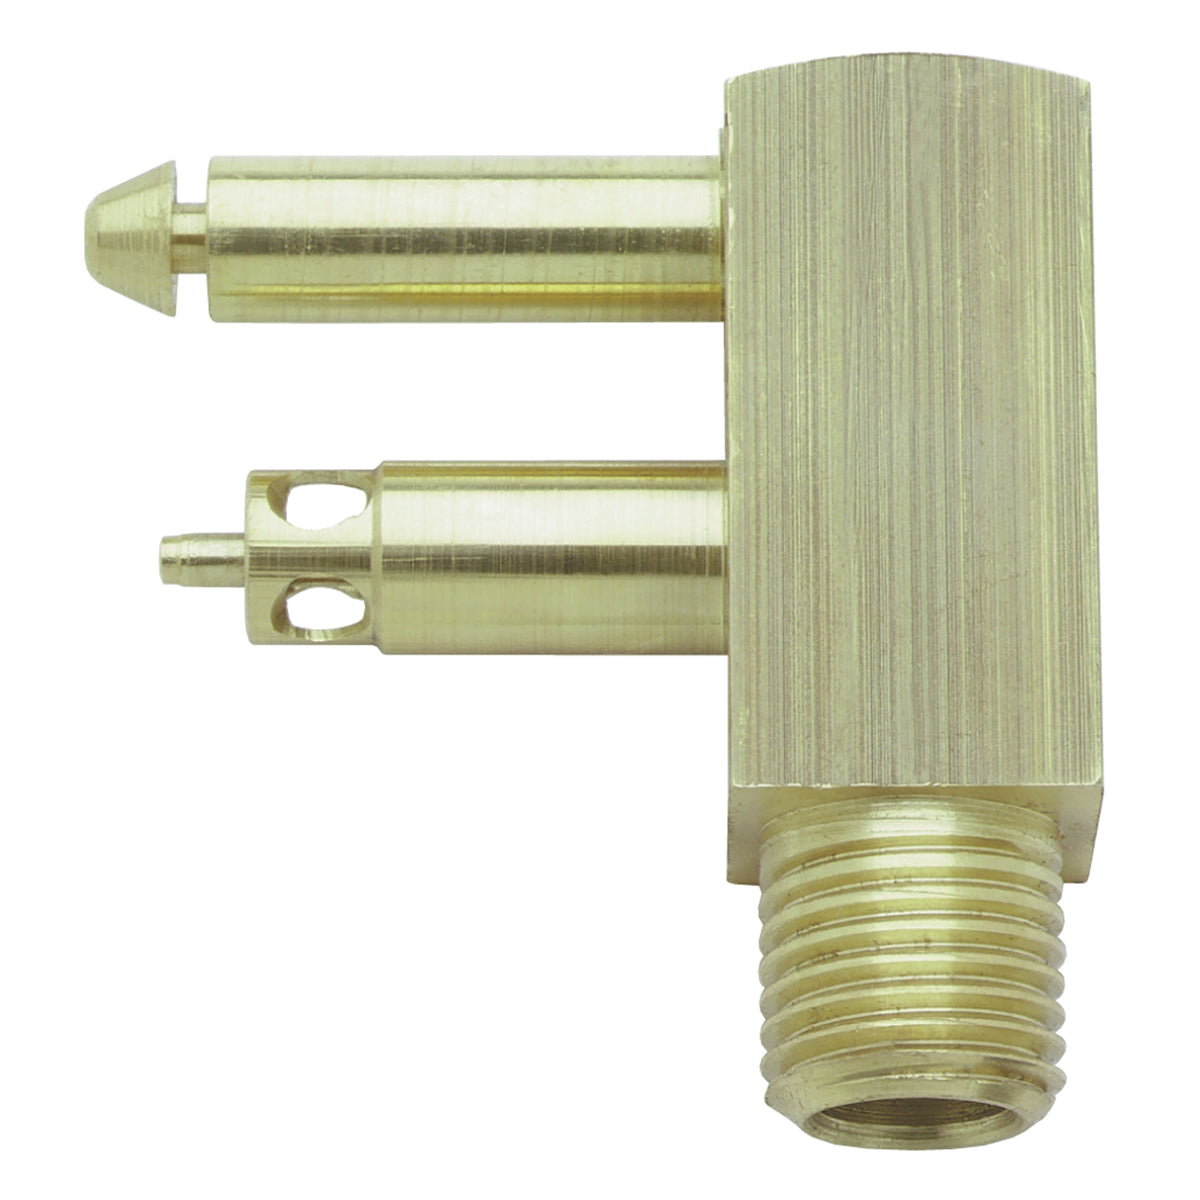 Attwood 8873-6 Mercury Quick-Connect Tank Fitting with 1/4 in. Male NPT Thread